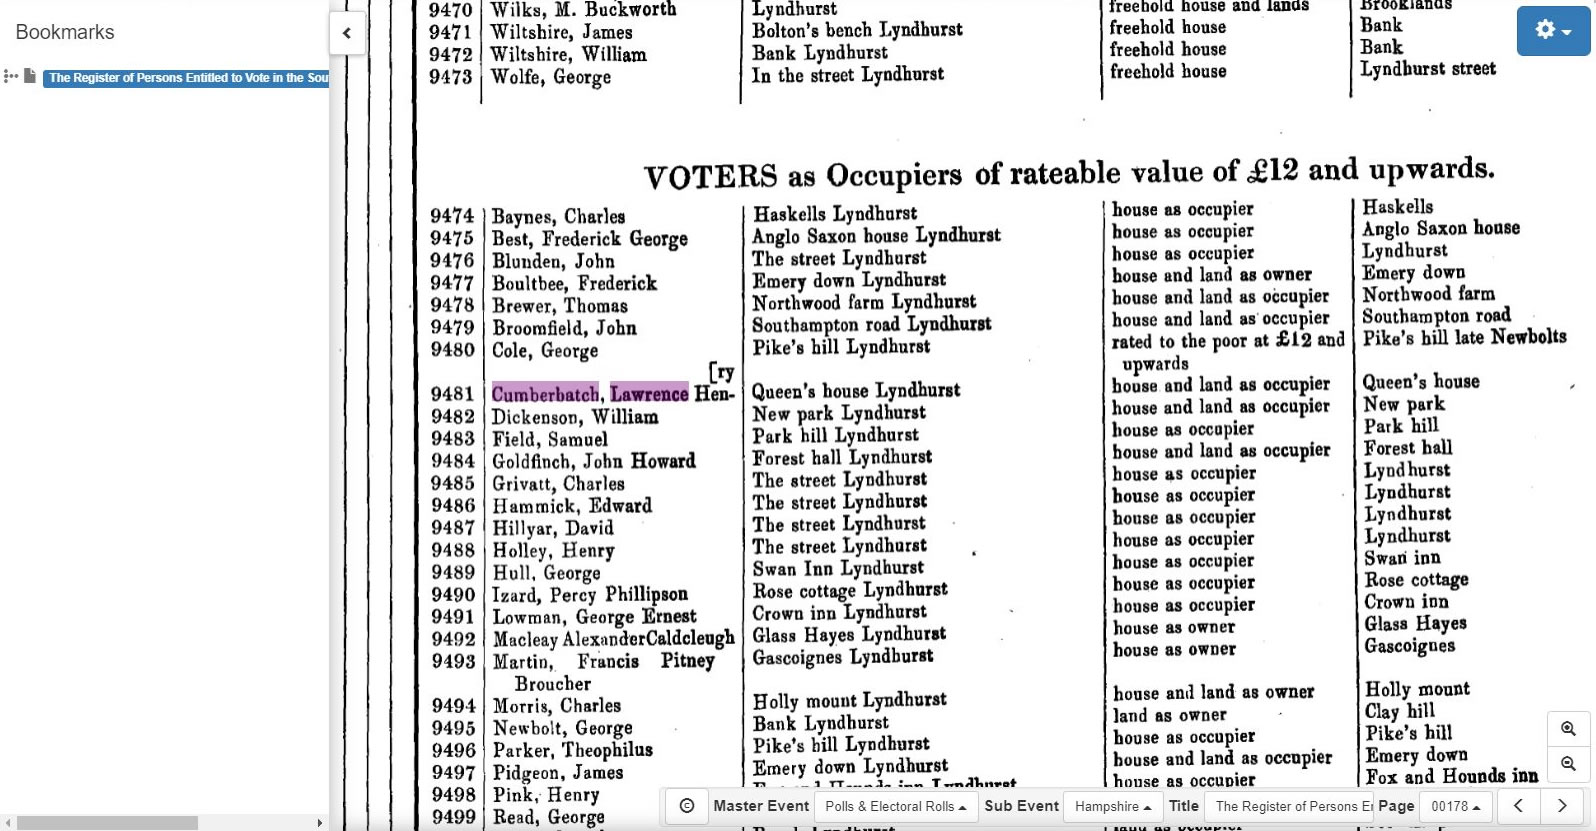 Lawrence Henry Cumberbatch in 1874 Poll Book